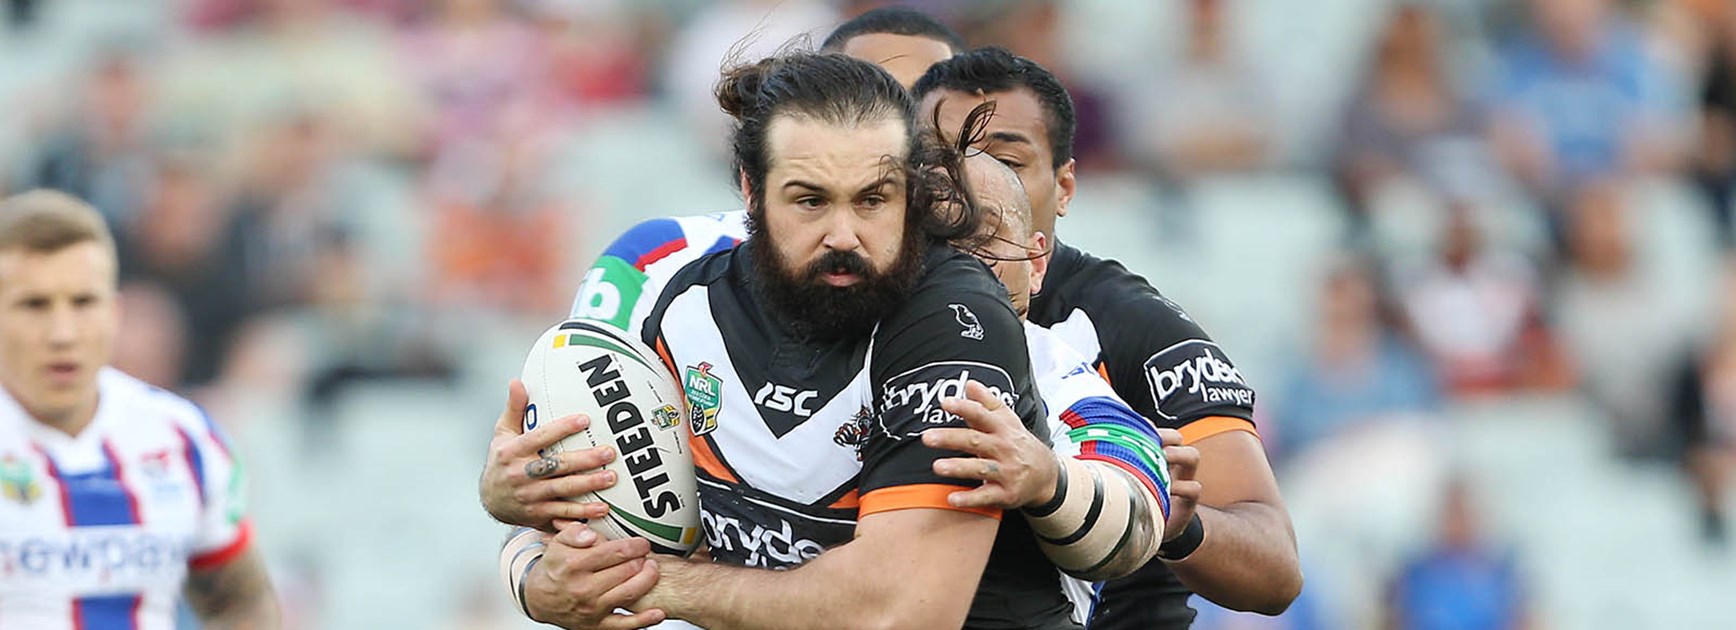 Aaron Woods had a massive game for the Wests Tigers against the Knights.